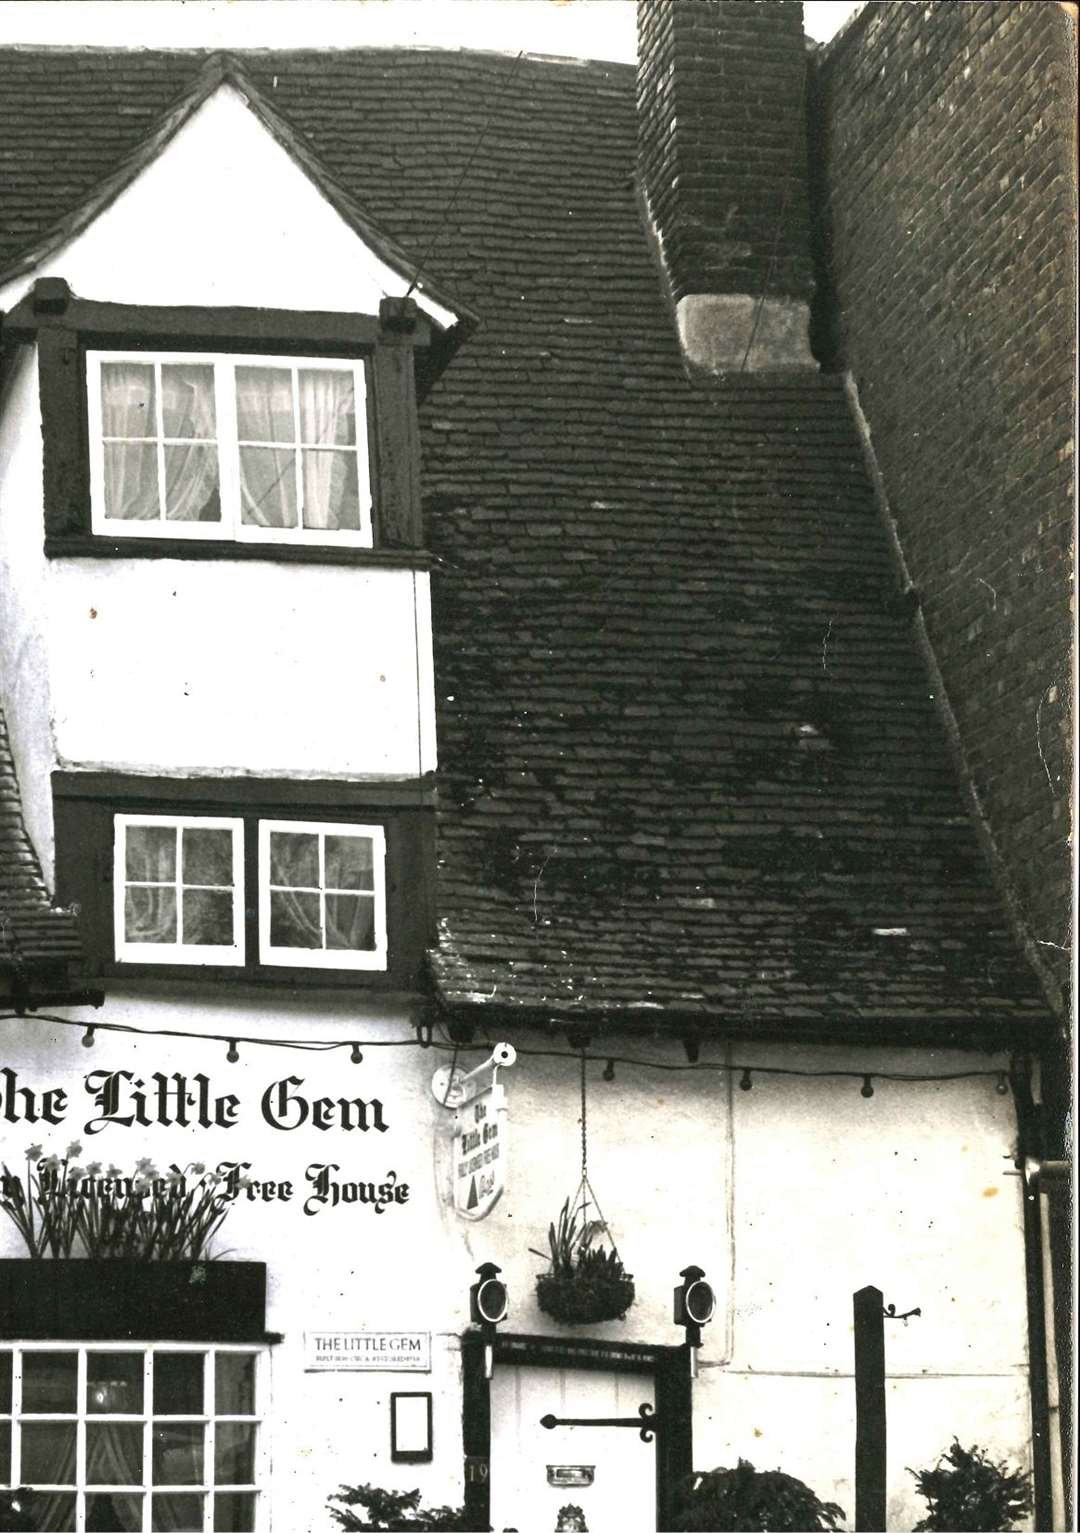 The Little Gem, shortly after it opened as a pub in 1971